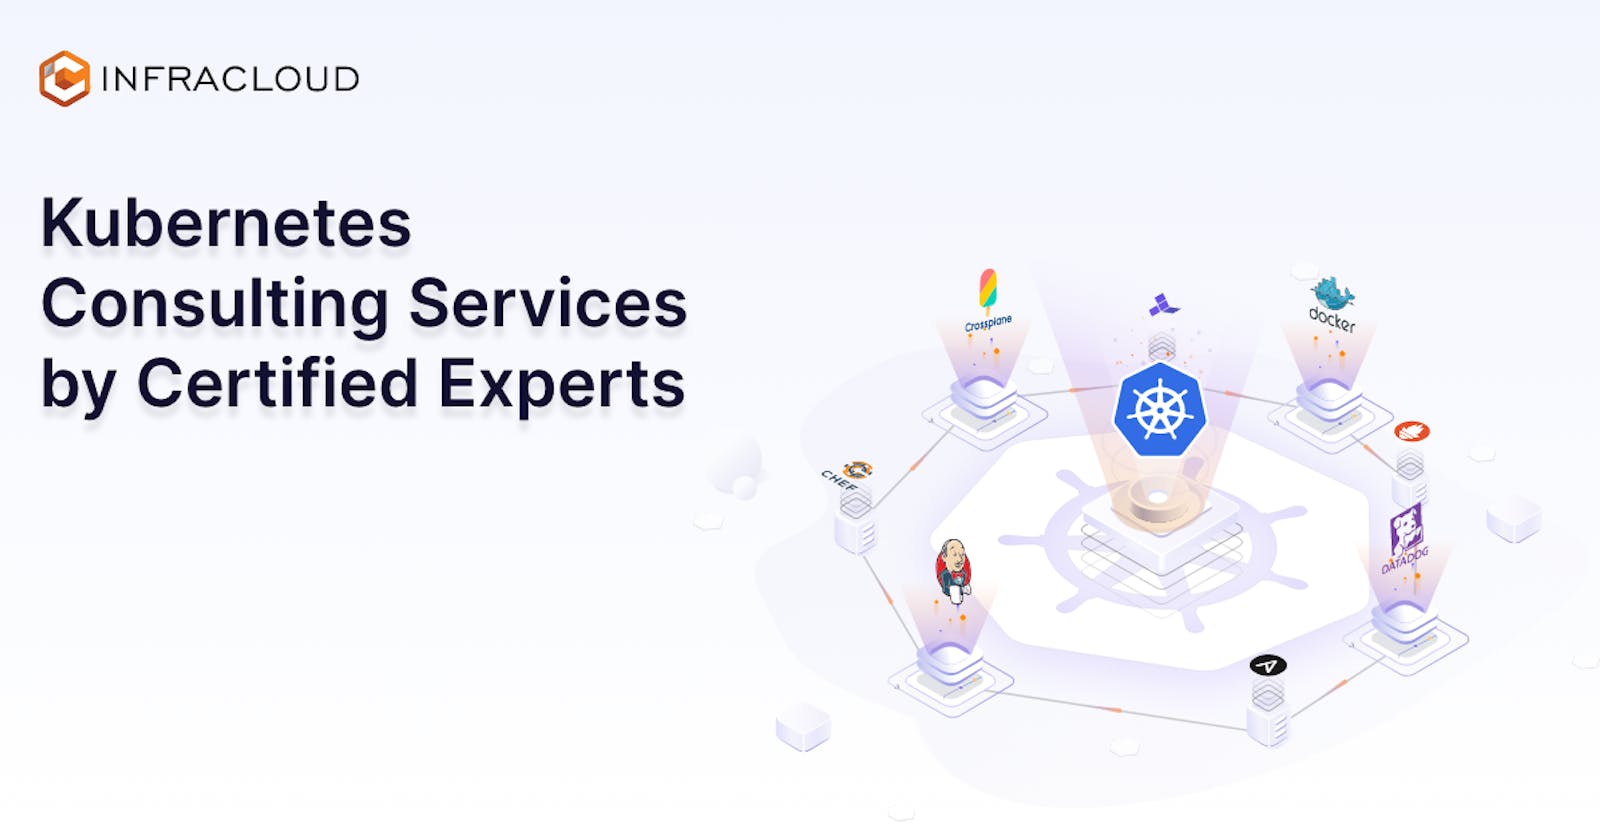 Kubernetes Consulting Services by Certified Experts